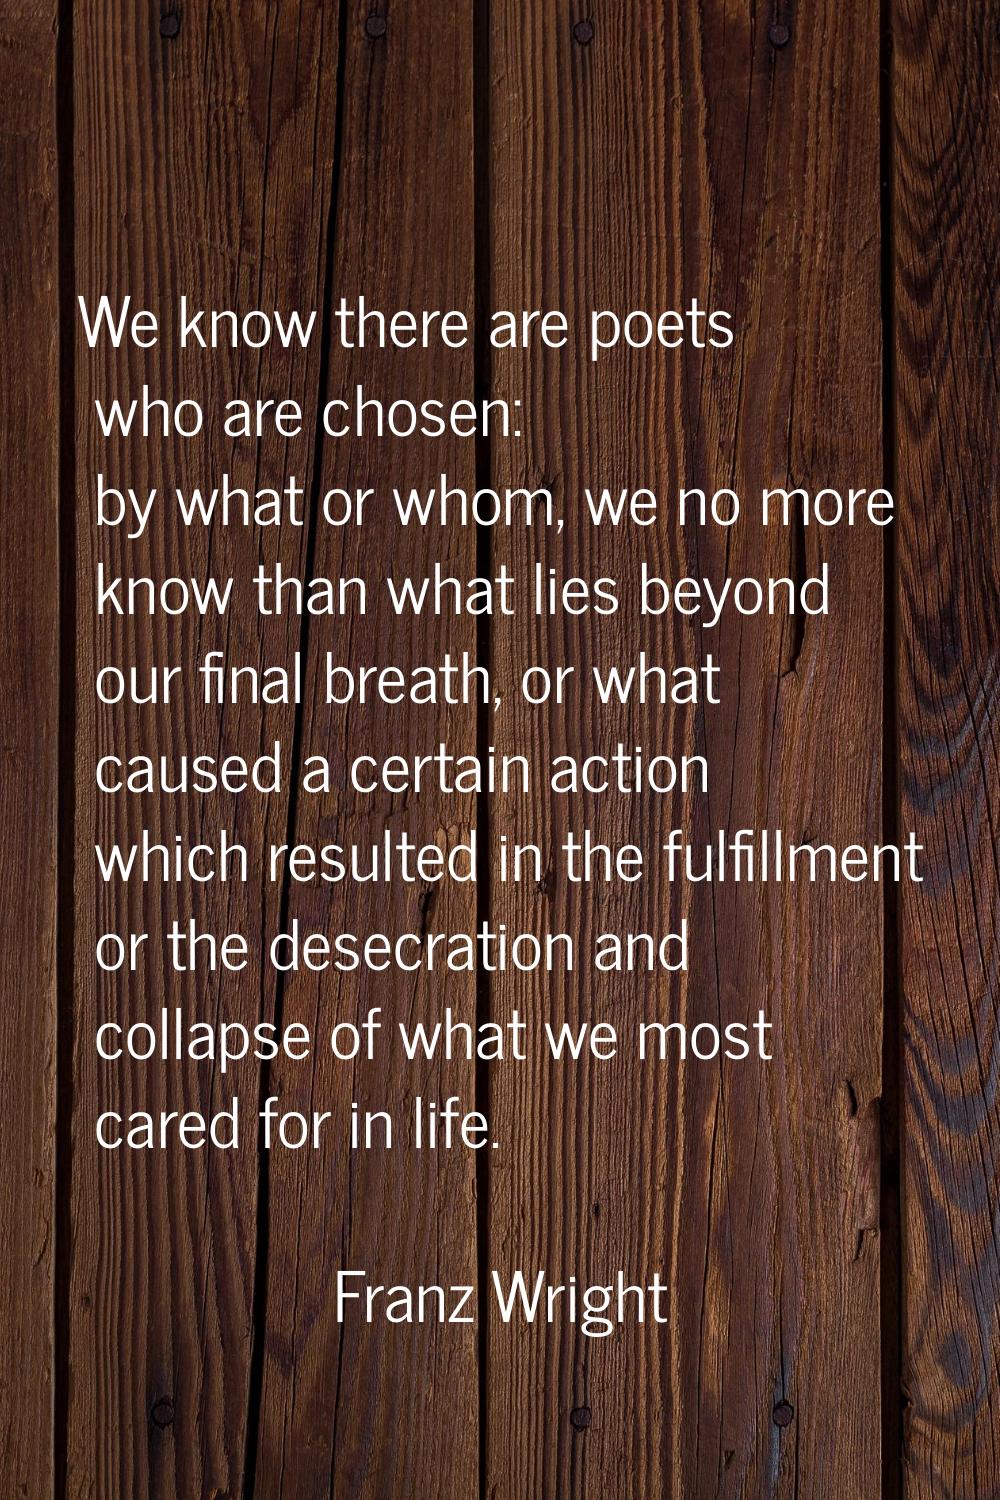 We know there are poets who are chosen: by what or whom, we no more know than what lies beyond our 